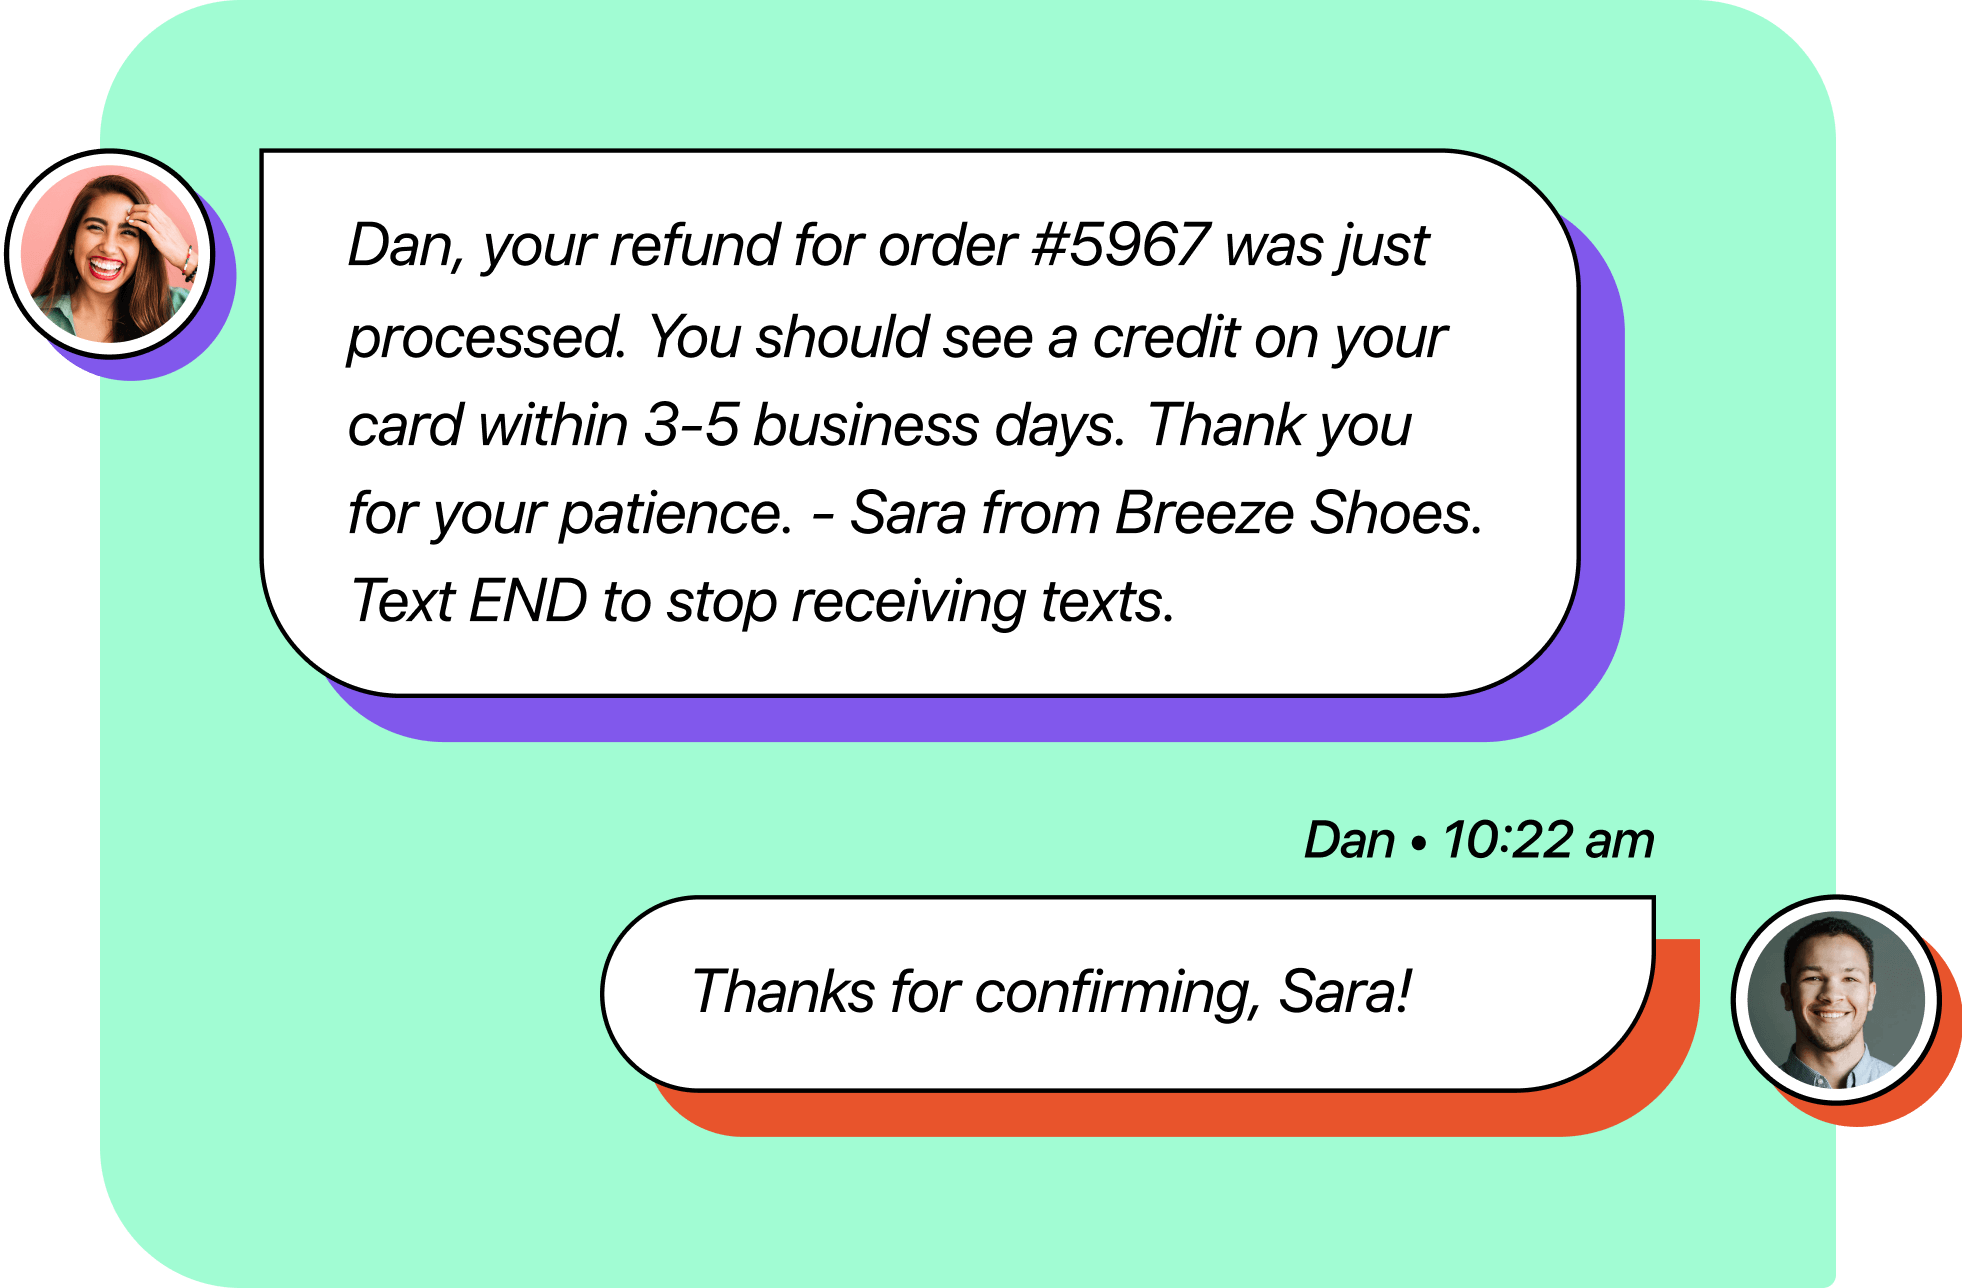 An SMS notification and response from a customer